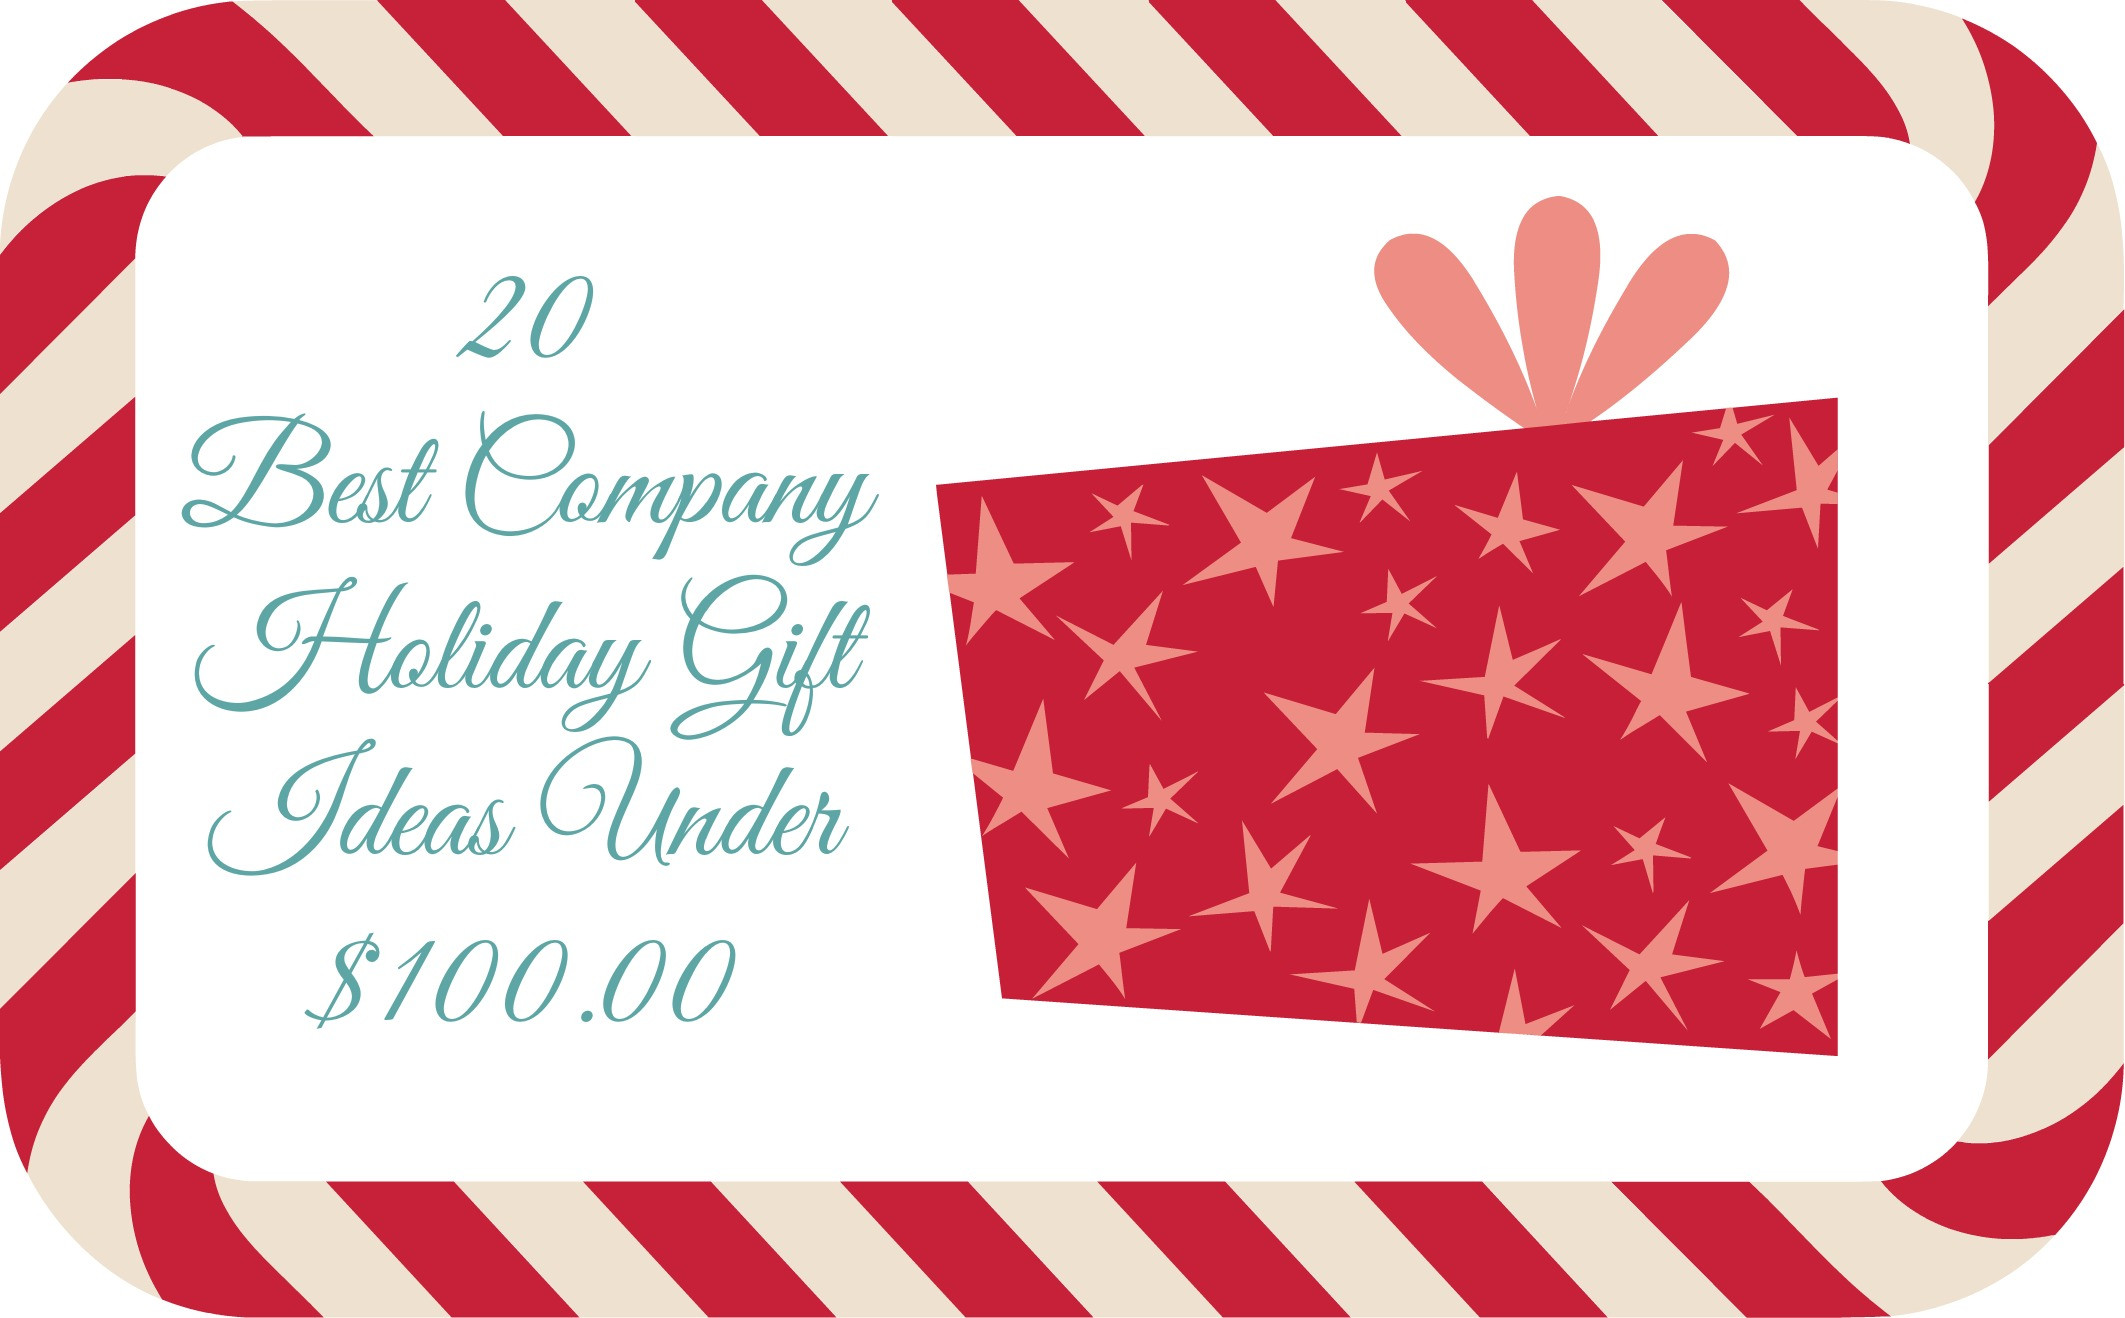 Corporate Holiday Party Gift Ideas
 20 Best pany Holiday Gift Ideas Under $100 00